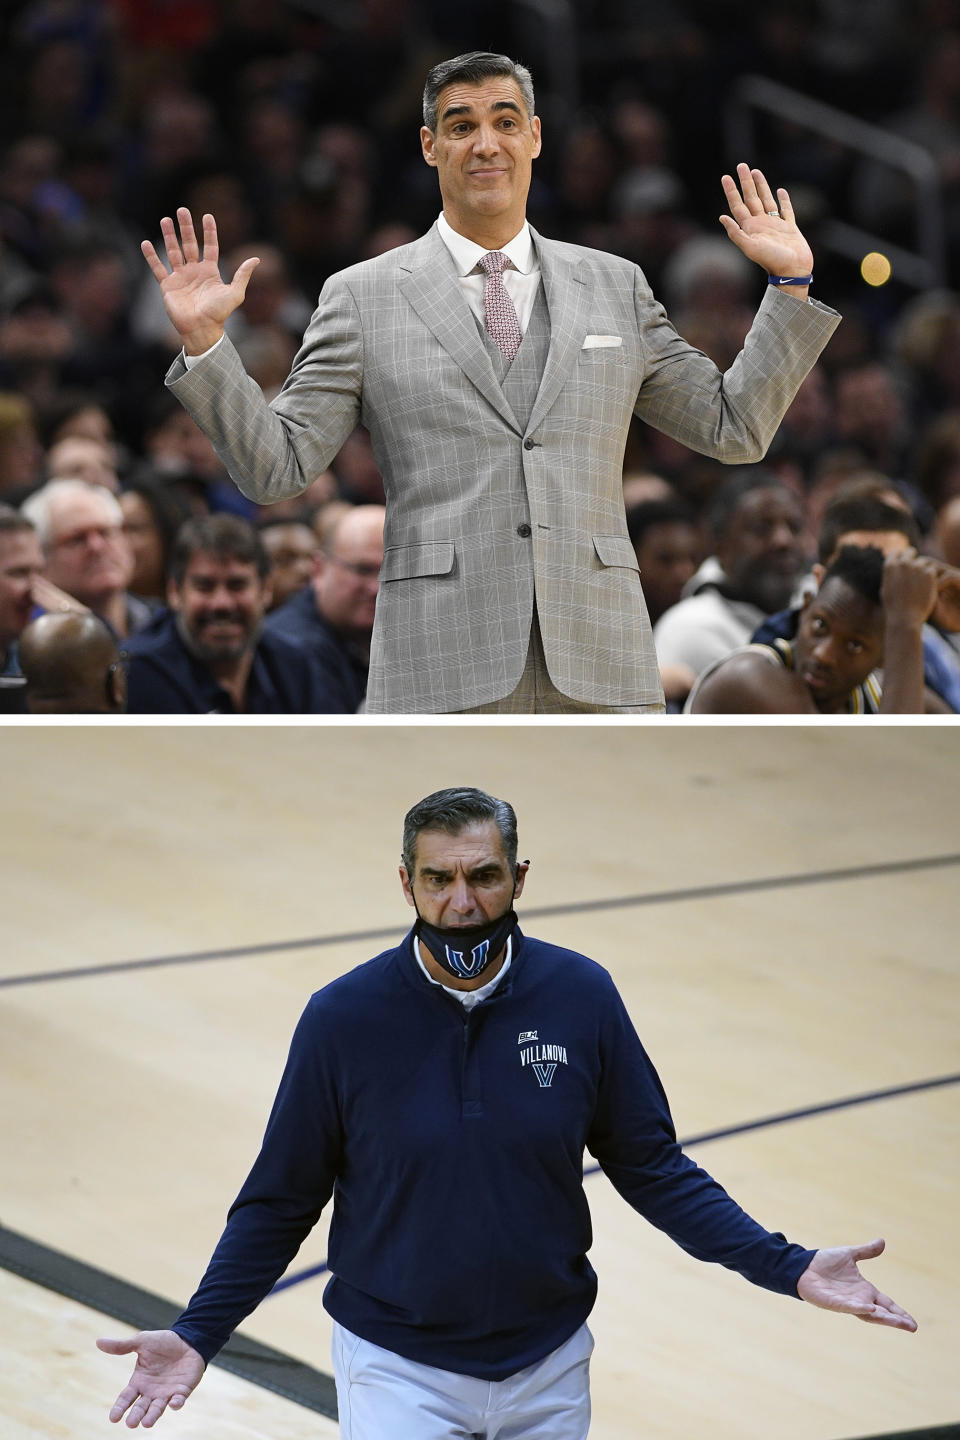 FILE - Top, in a March 7, 2020, file photo, Villanova head coach Jay Wright gestures during the second half of an NCAA college basketball game against Georgetown in Washington. Bottom, in a Dec. 16, 2020, file photo, Villanova's coach Wright coaches during an NCAA college basketball game against Butler in Villanova, Pa. College basketball coaches have eschewed the traditional game day attire of coats, ties and dress slacks in favor of polos, quarter-zips and warmup pants. The trend started over the summer with NBA coaches who went casual when the league re-started its season at Walt Disney World resort near Orlando. Men's and women's coaches say they're more comfortable. The personal tailor for Villanova's Jay Wright says he doesn't like the change. (AP Photo/File)